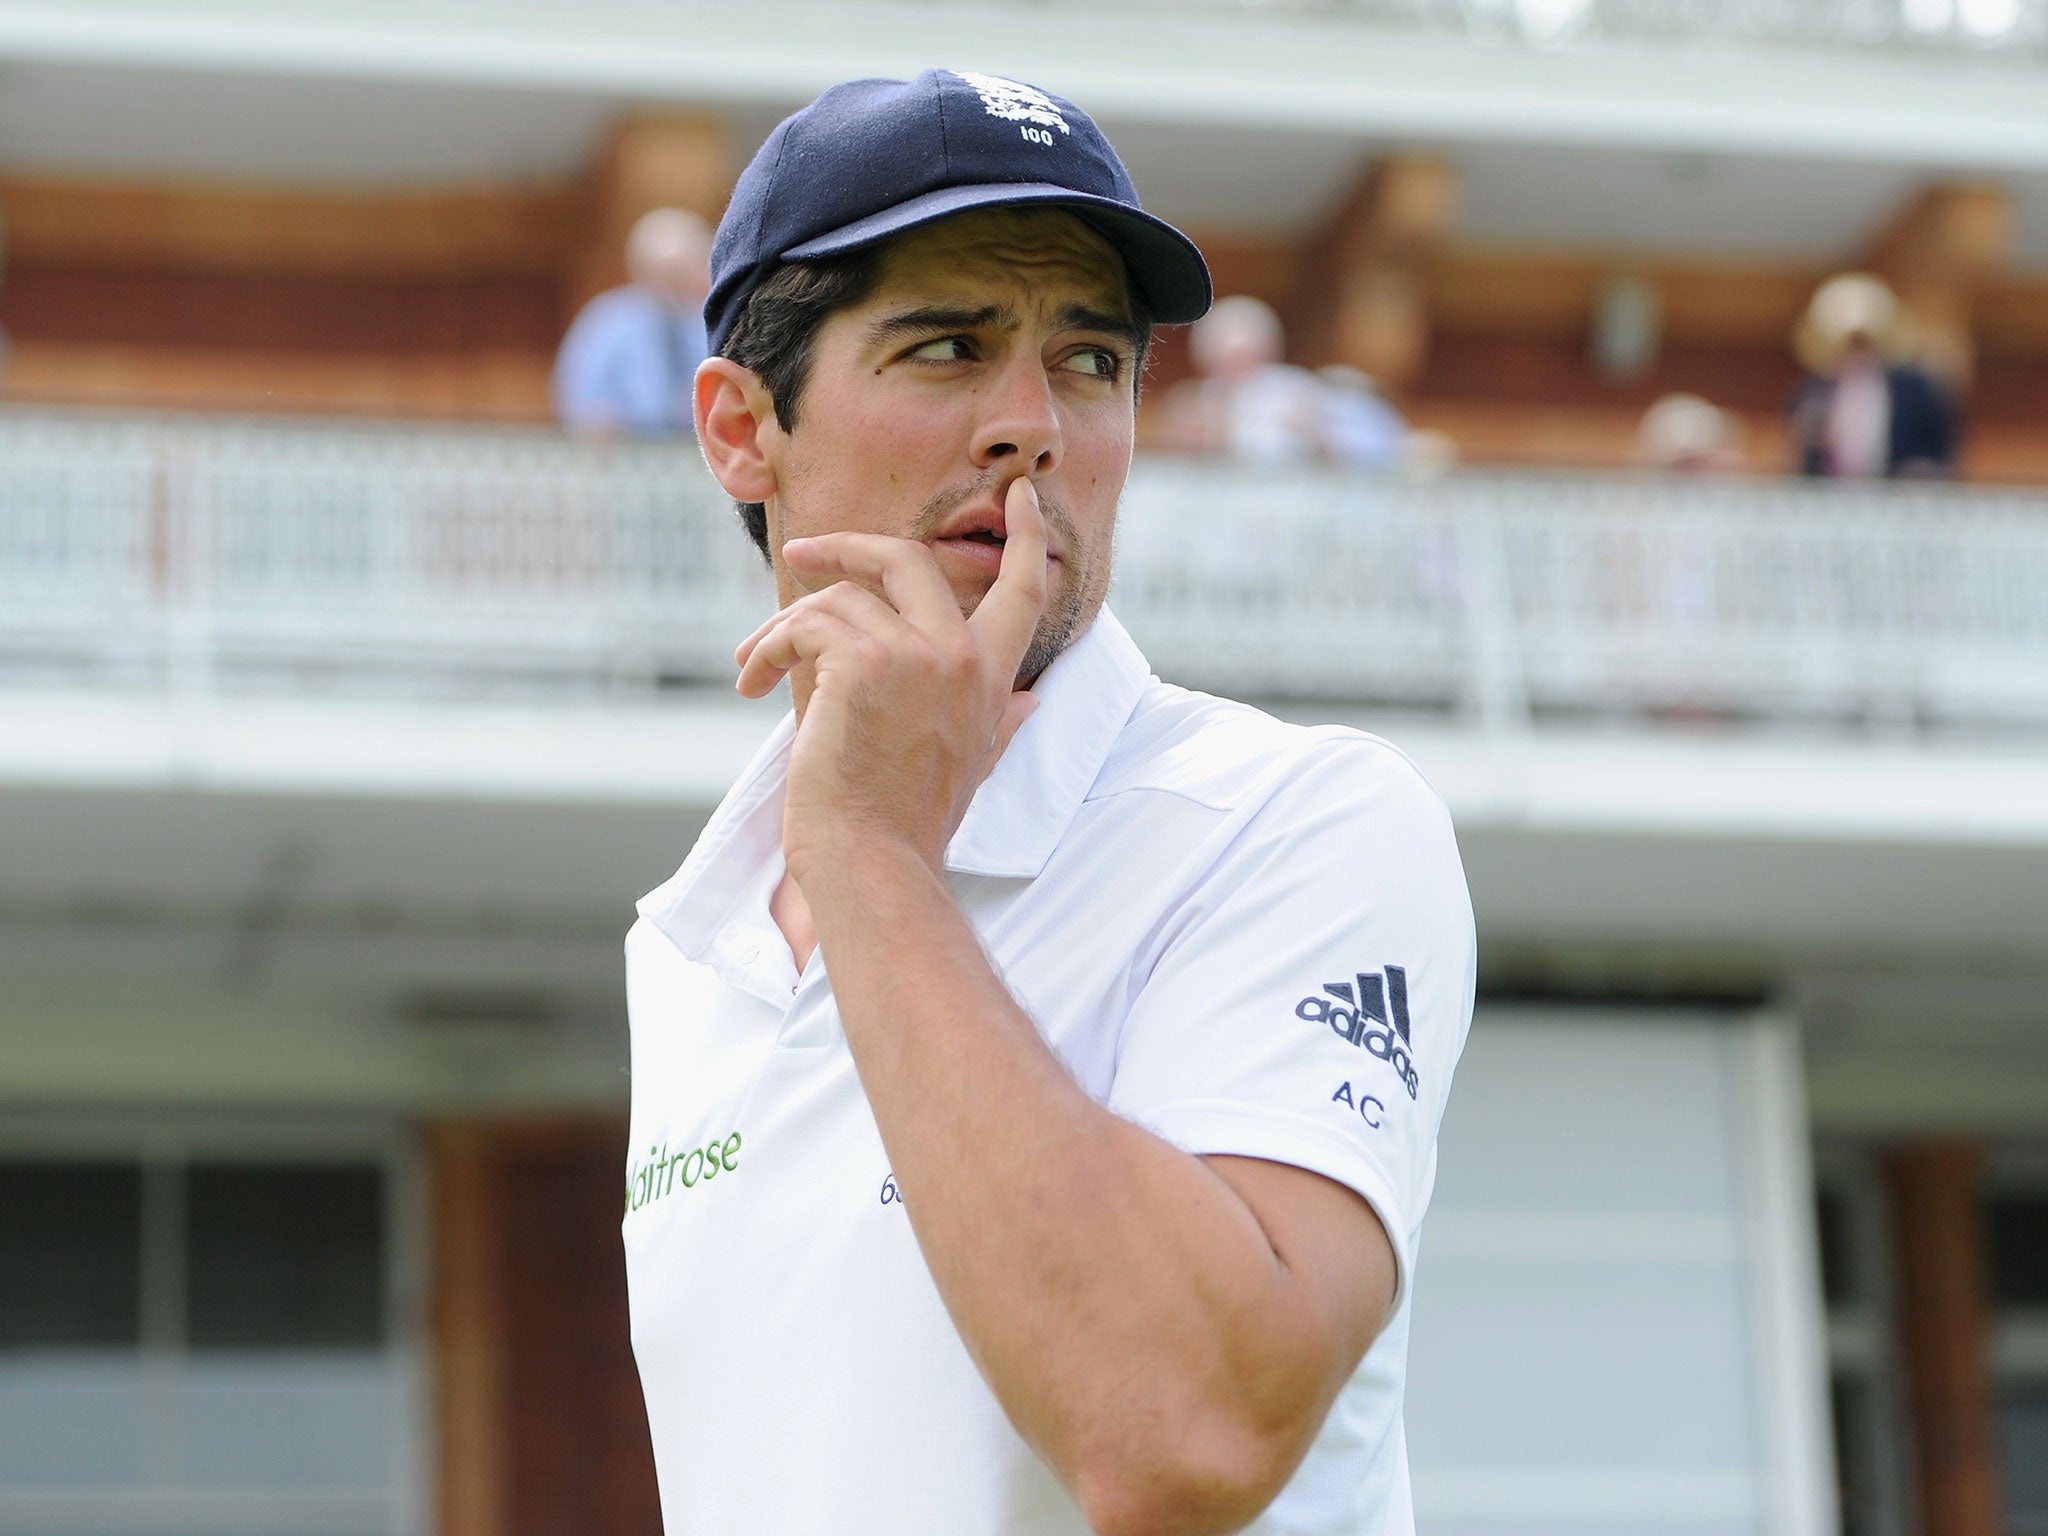 Alastair Cook has shrugged off criticism from former team-mate Kevin Pietersen